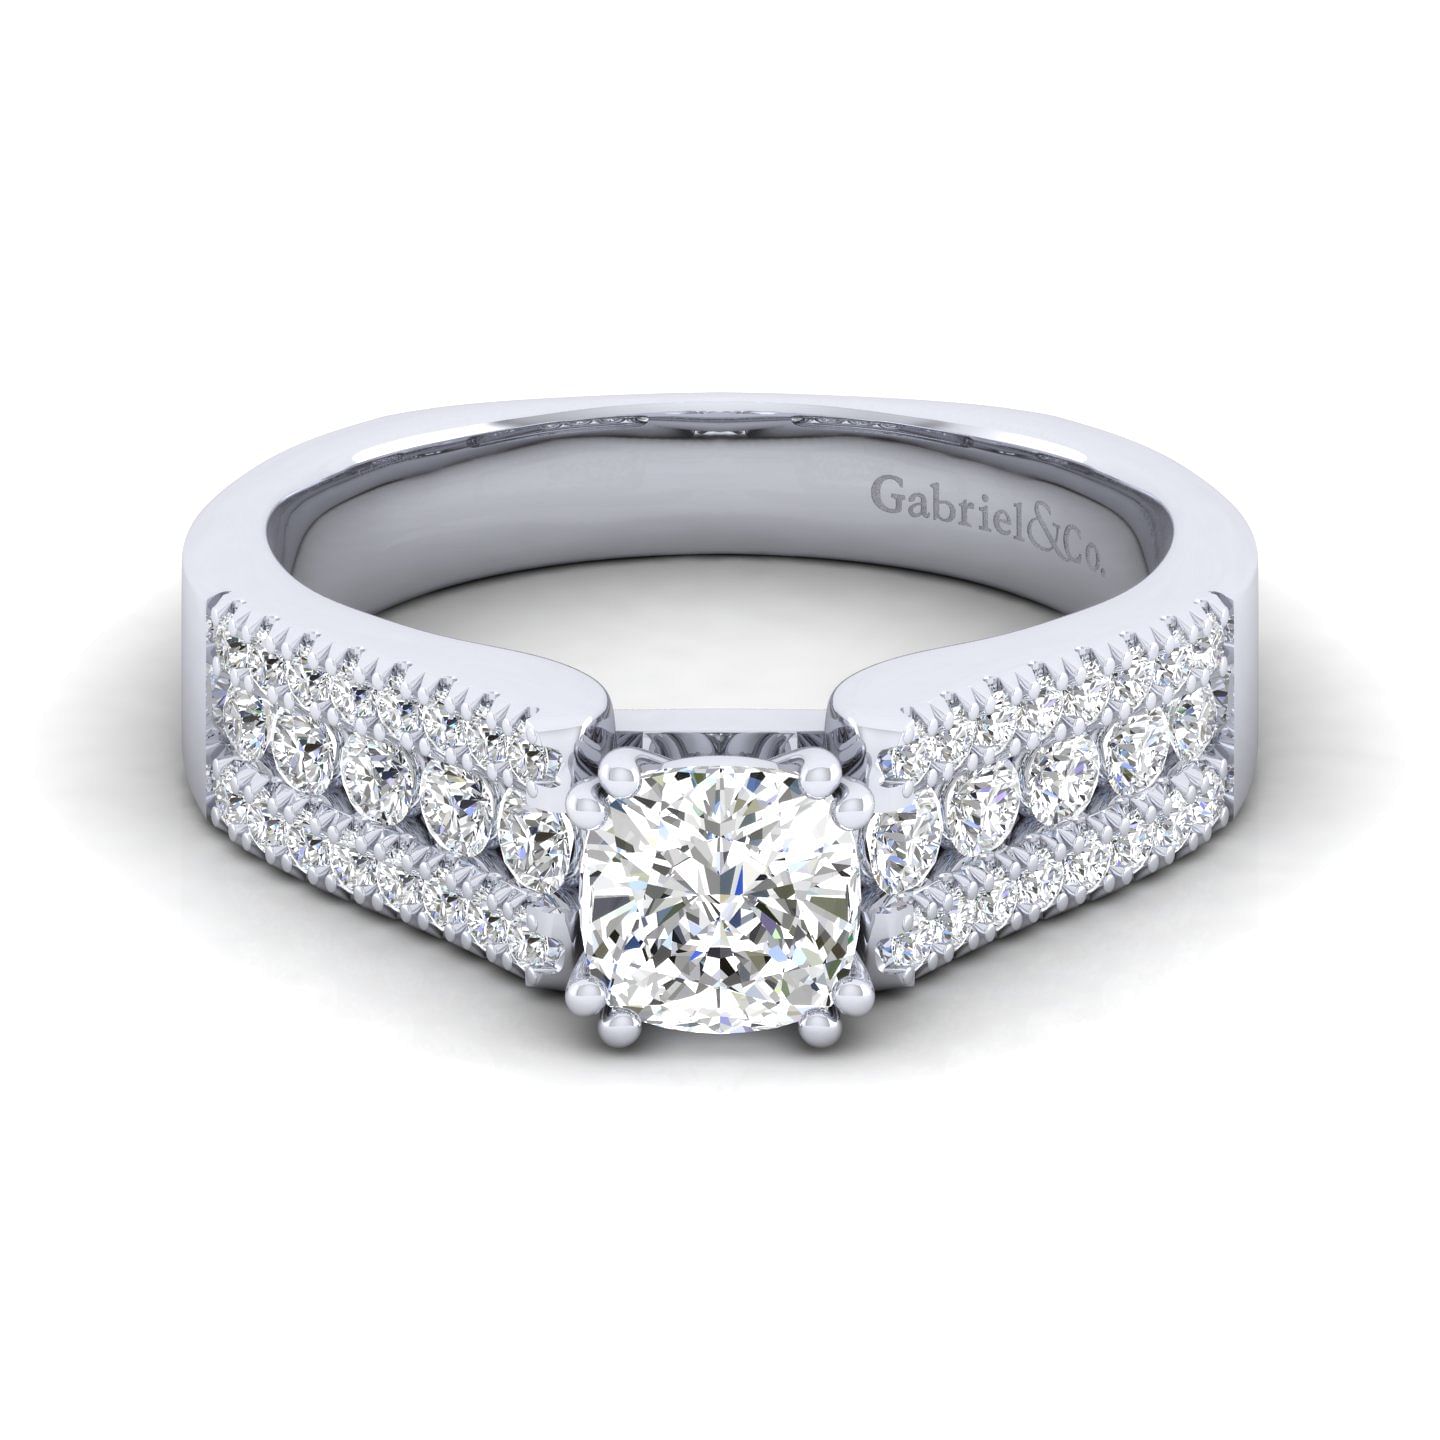 Channing - 14K White Gold Wide Band Cushion Cut Diamond Engagement Ring